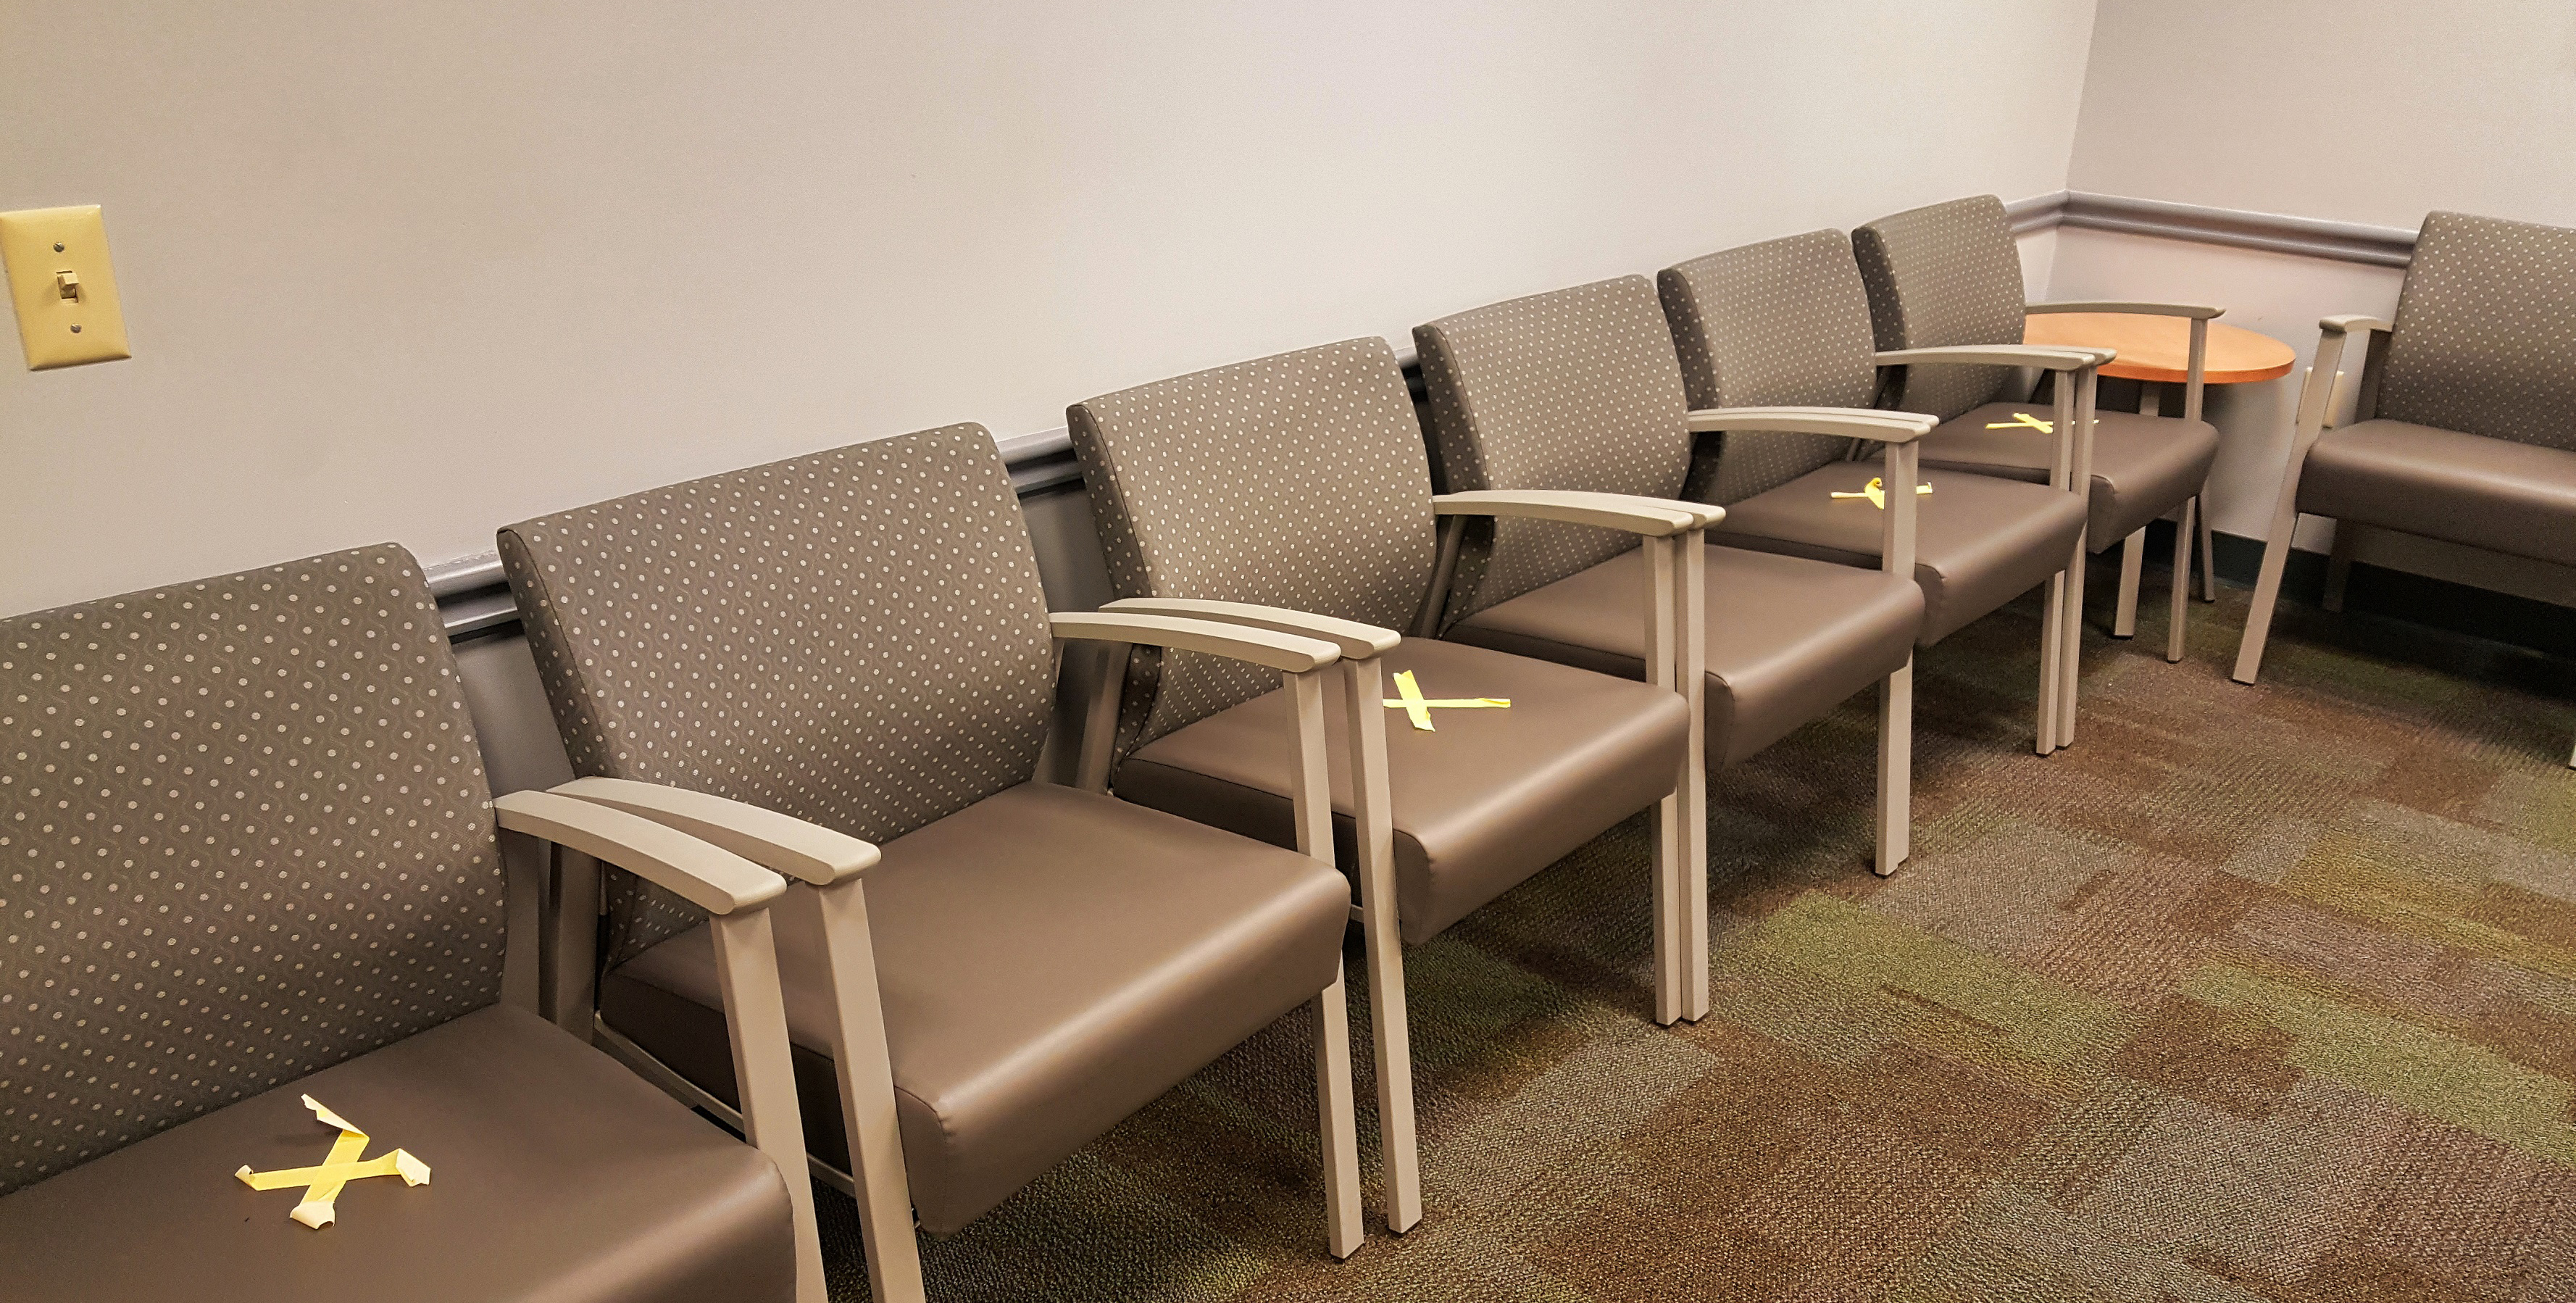 Empty chairs in waiting room, marked with X's for social distancing